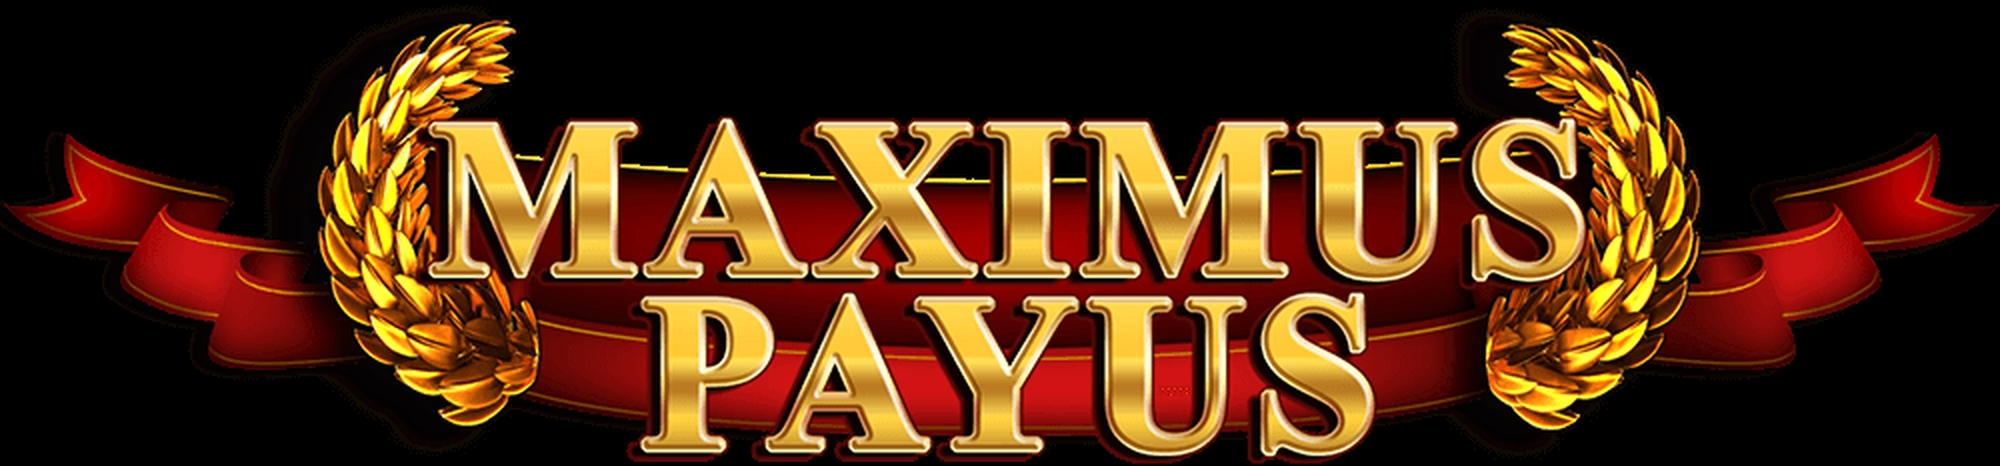 The Maximus Payus Online Slot Demo Game by Inspired Gaming